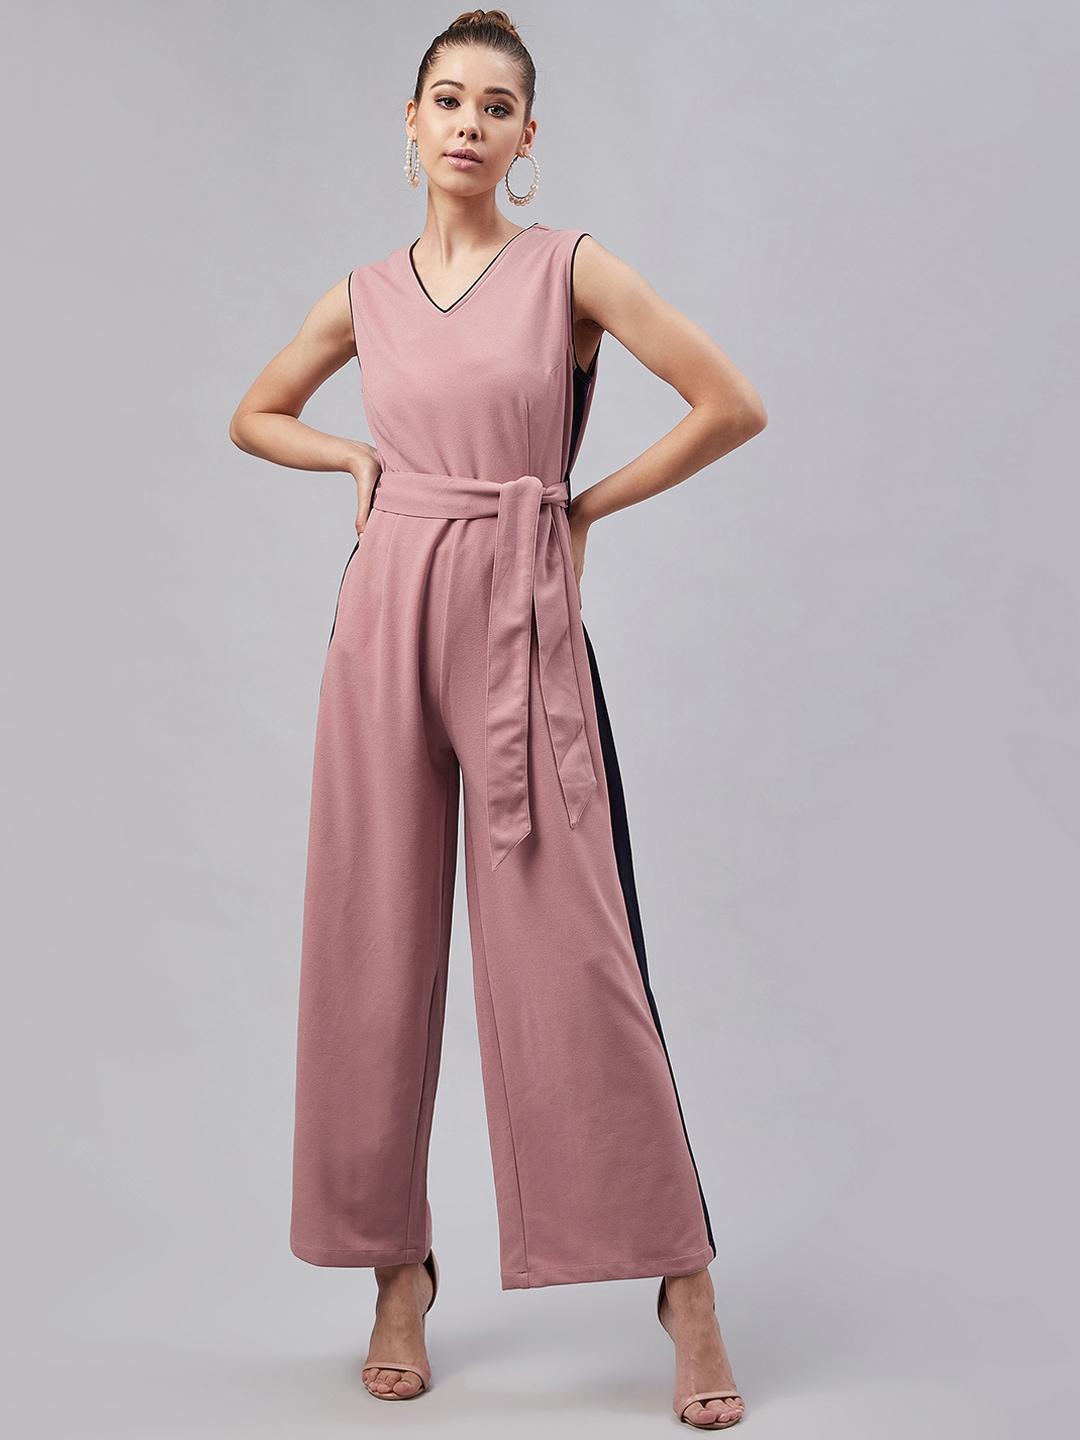 marie claire women pink & navy blue solid basic jumpsuit